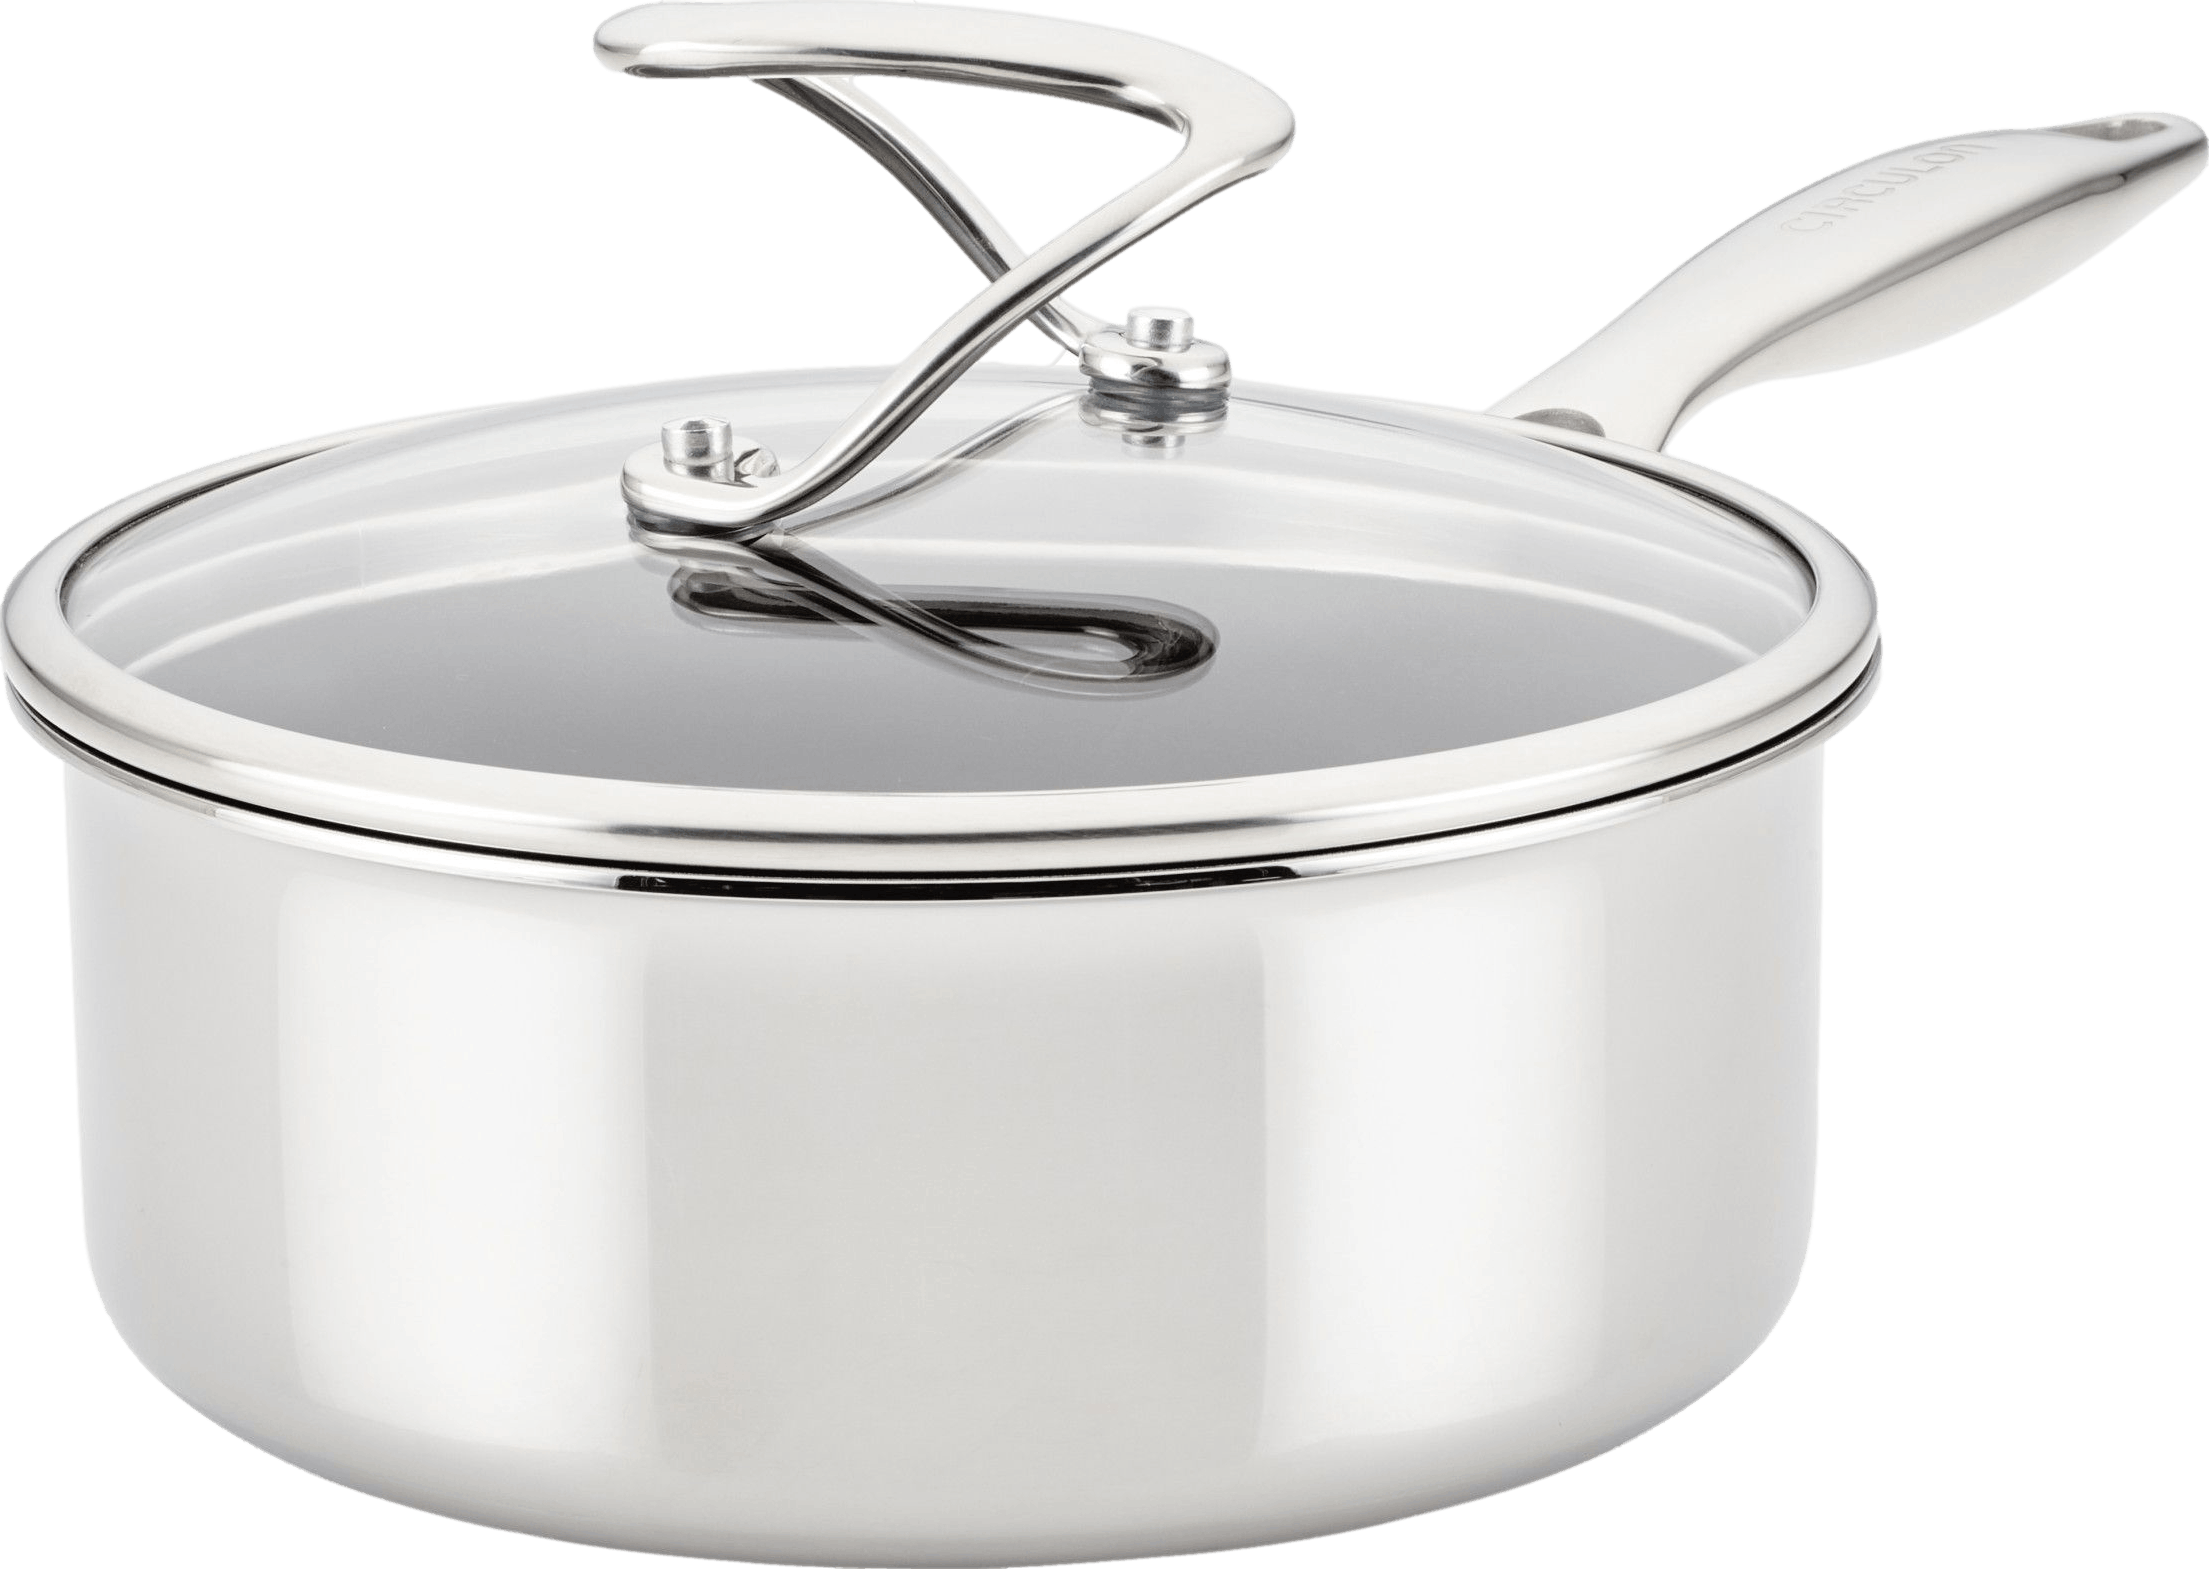 Circulon Clad Stainless Steel Induction Saucepan with Glass Lid and Hybrid SteelShield and Nonstick Technology, 2-Quart, Silver